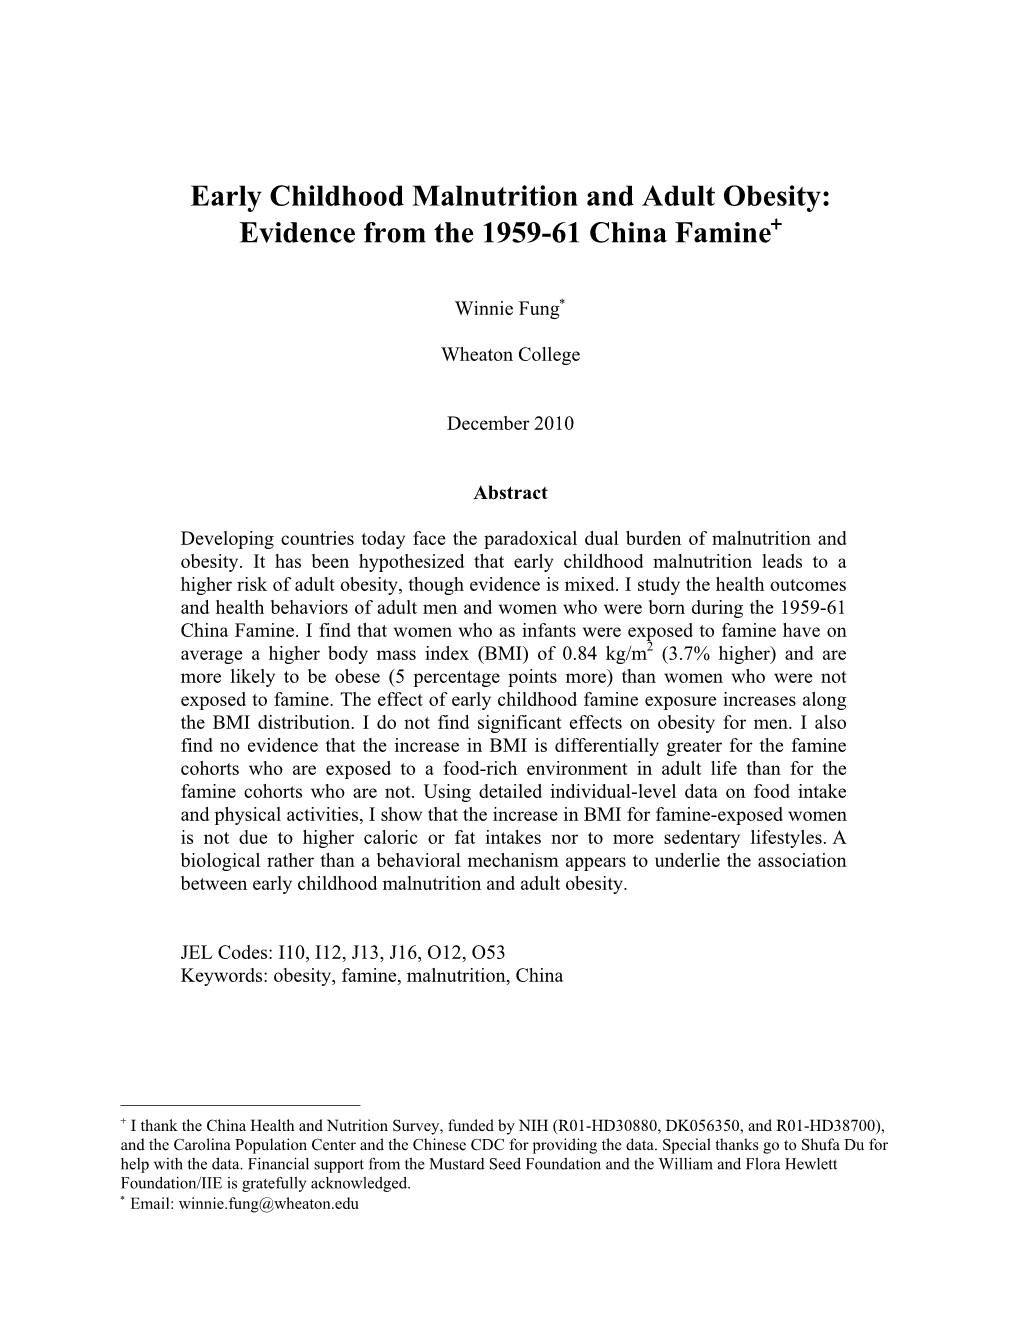 Early Childhood Malnutrition and Adult Obesity: Evidence from the 1959-61 China Famine